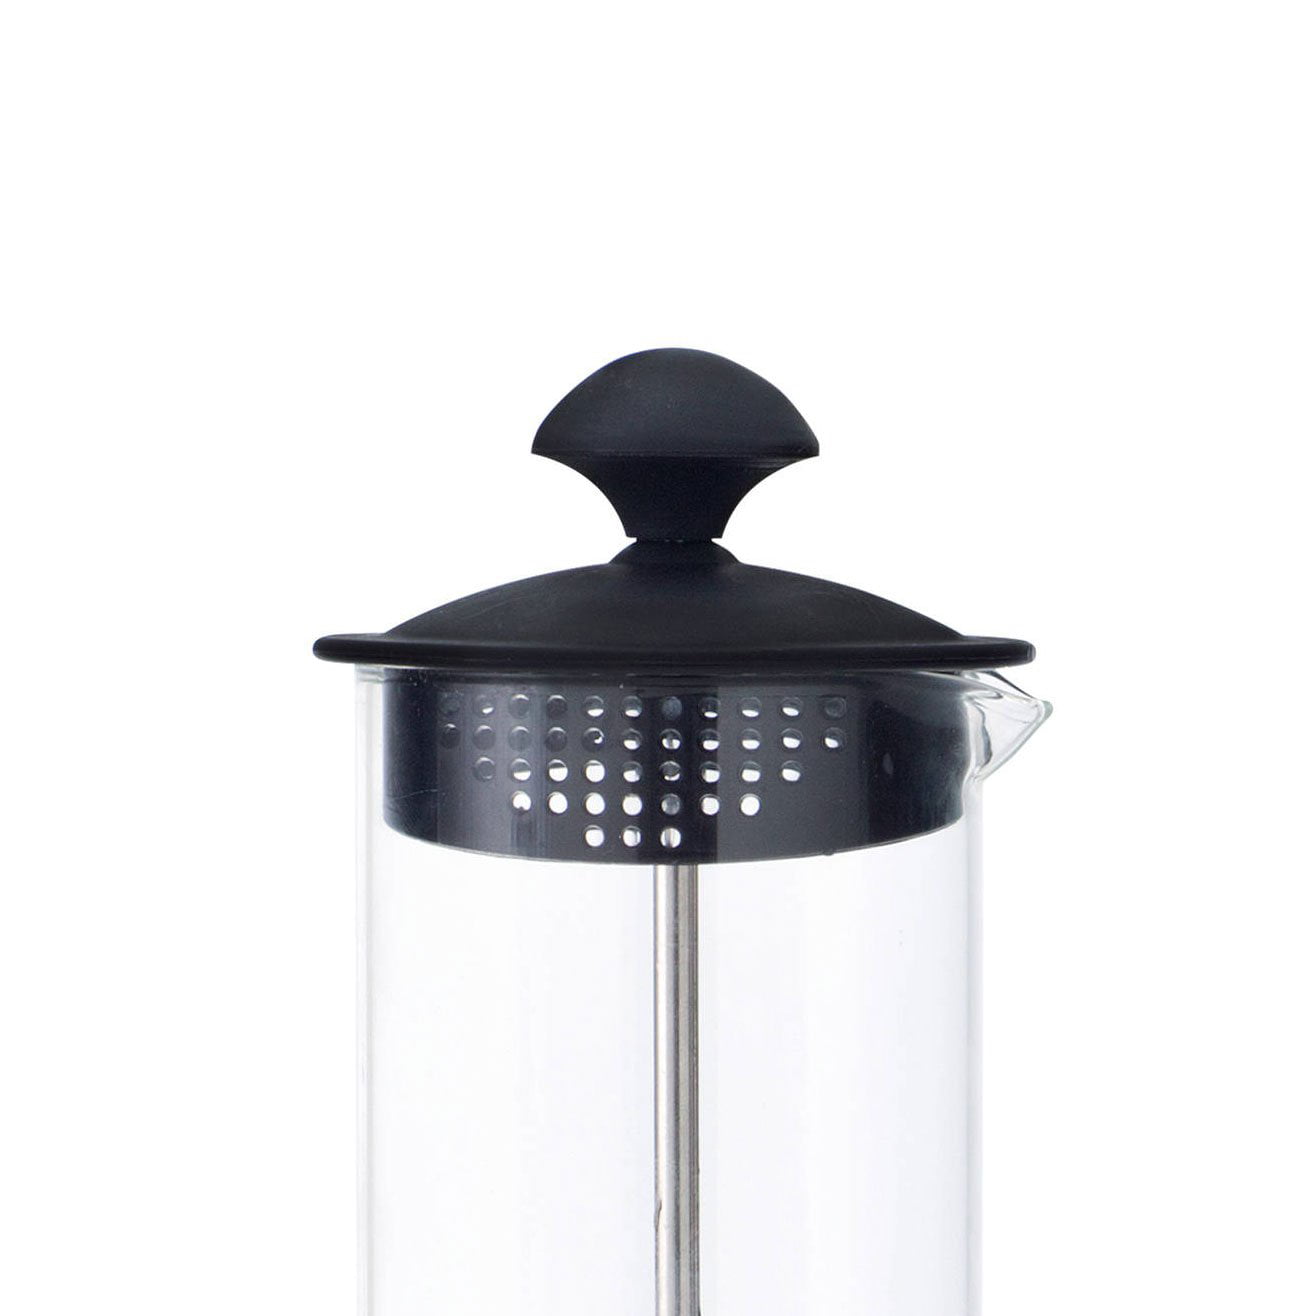 Ninja Coffee Bar Easy Milk Frother with Press Froth Technology